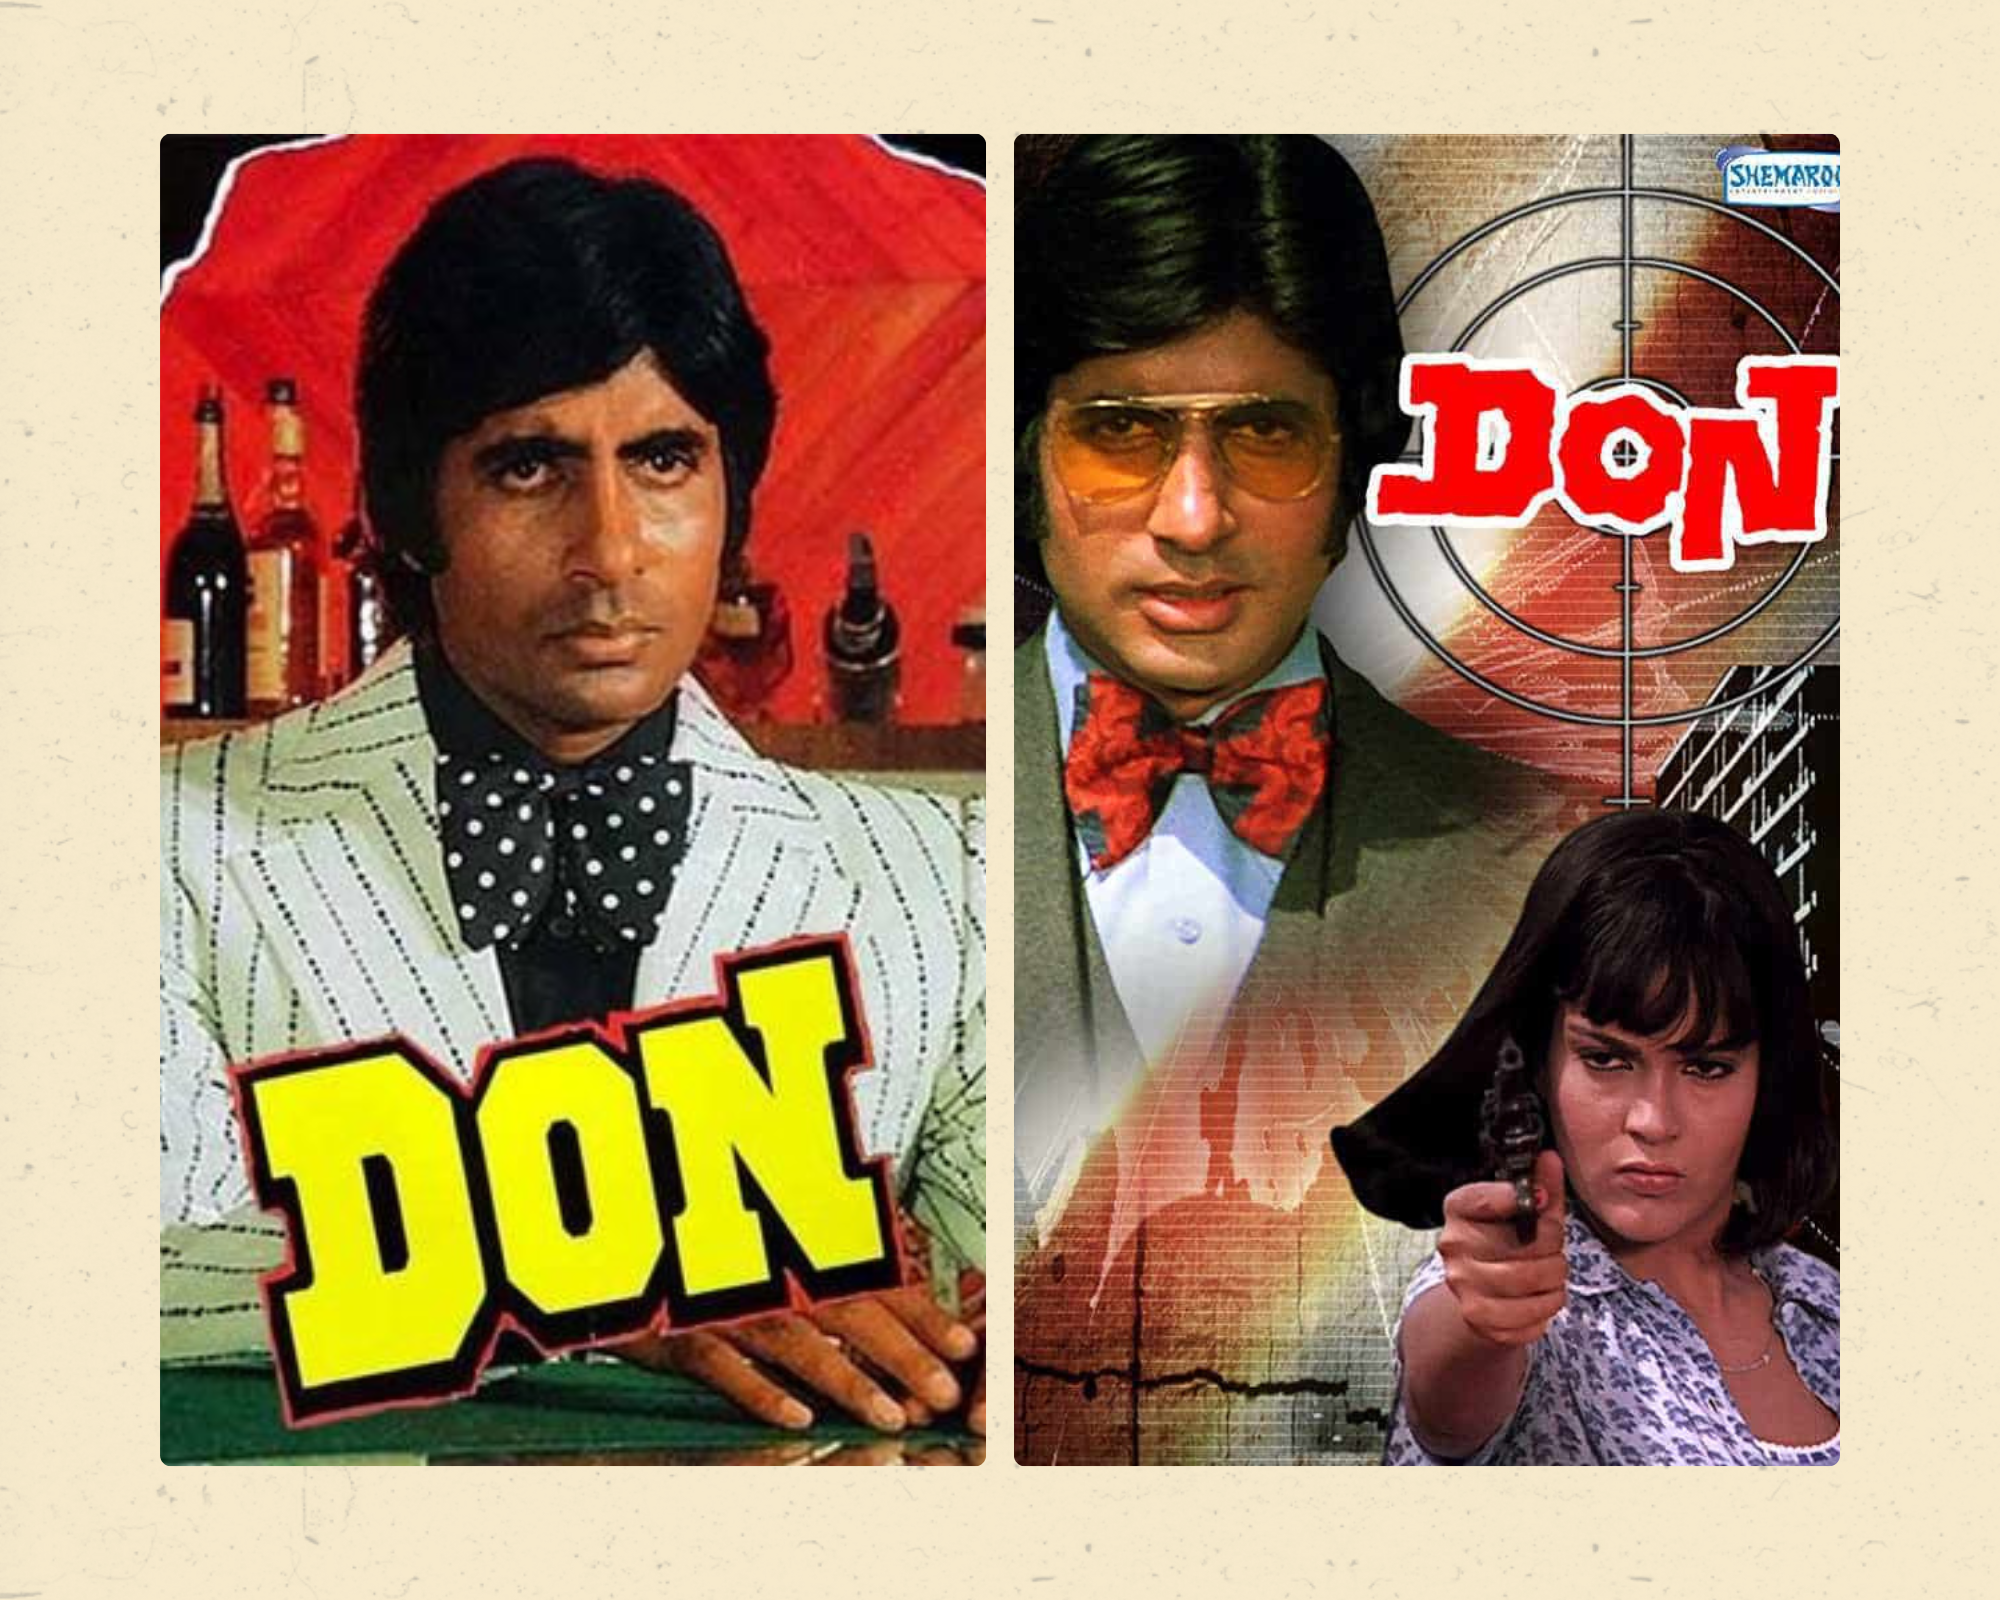 Film Poster for ‘Din’ featuring Amitabh Bachchan